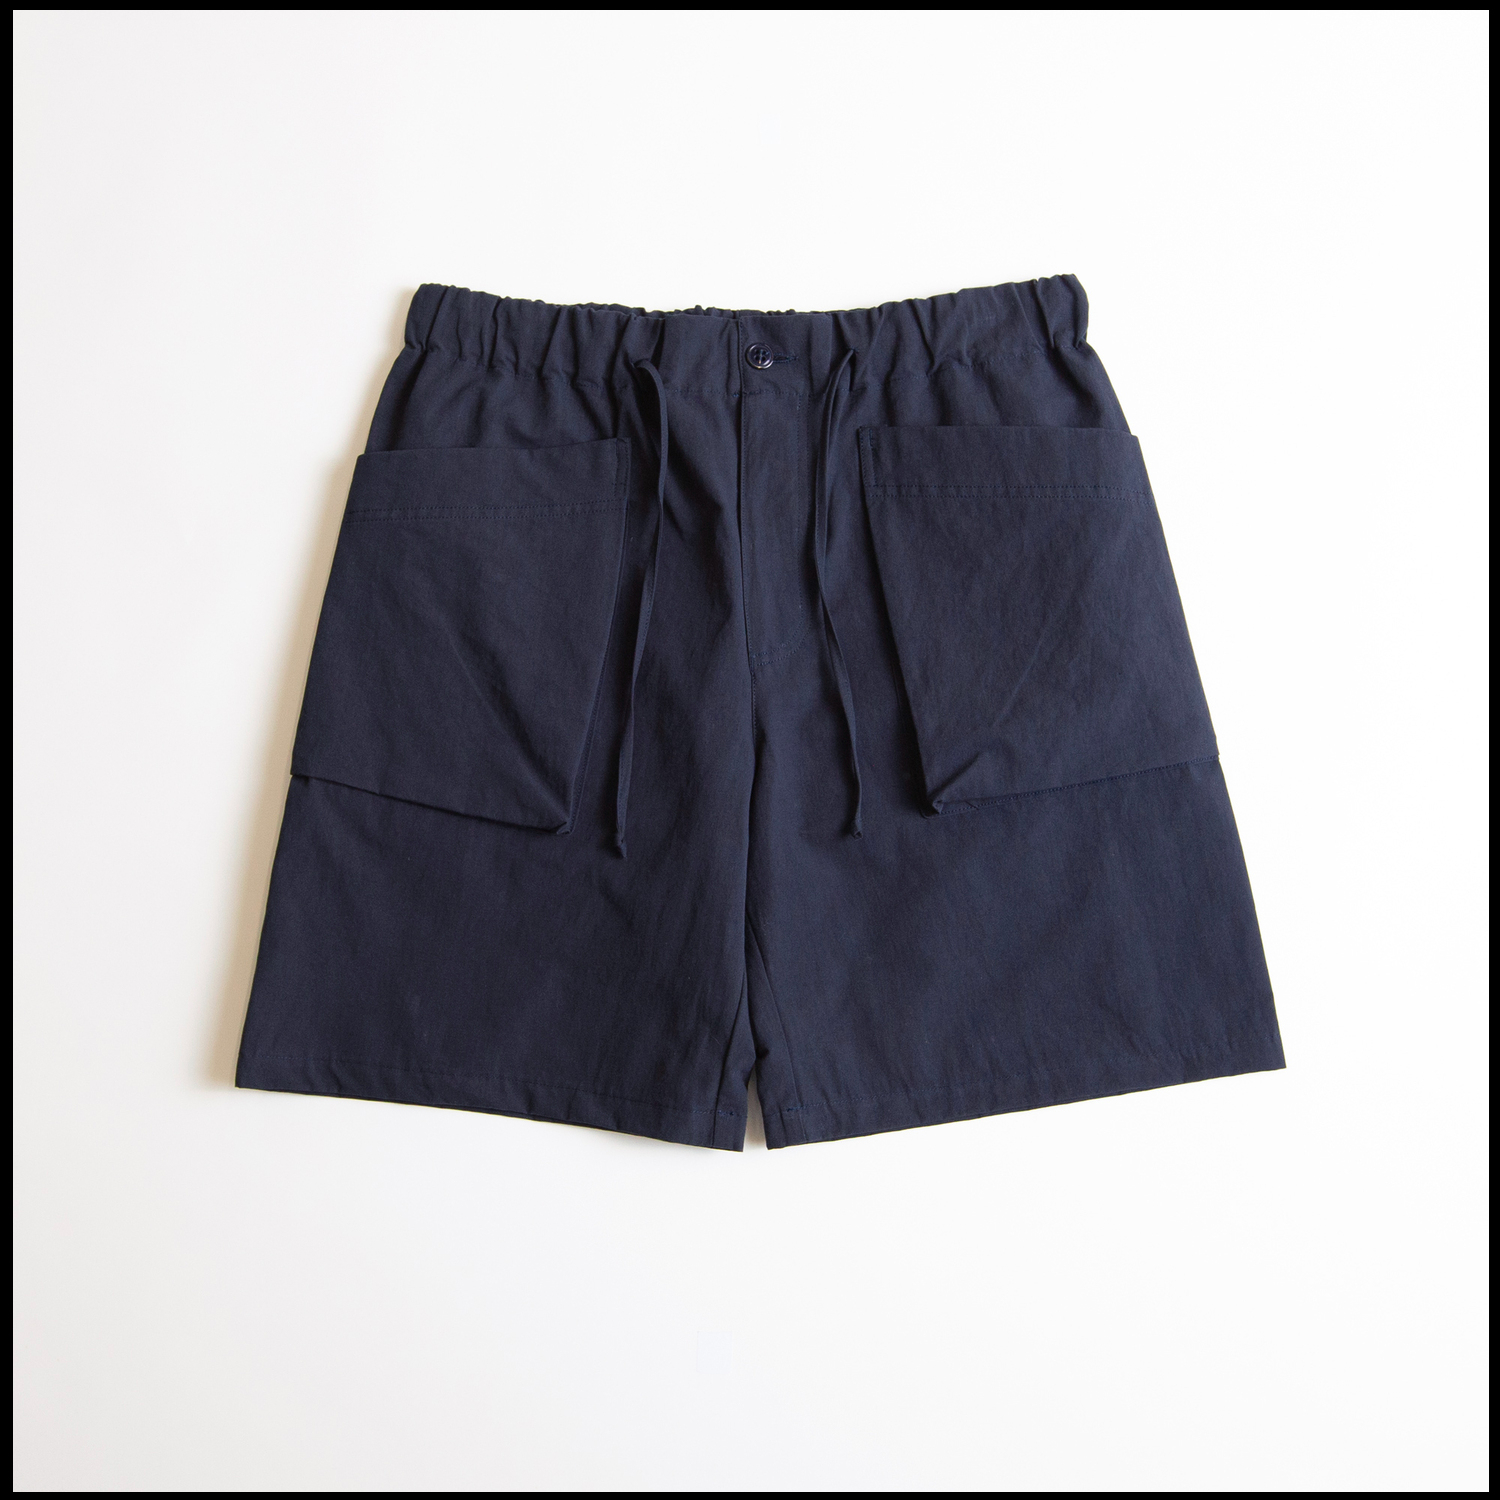 CARGO S in Midnight blue color by Arpenteur